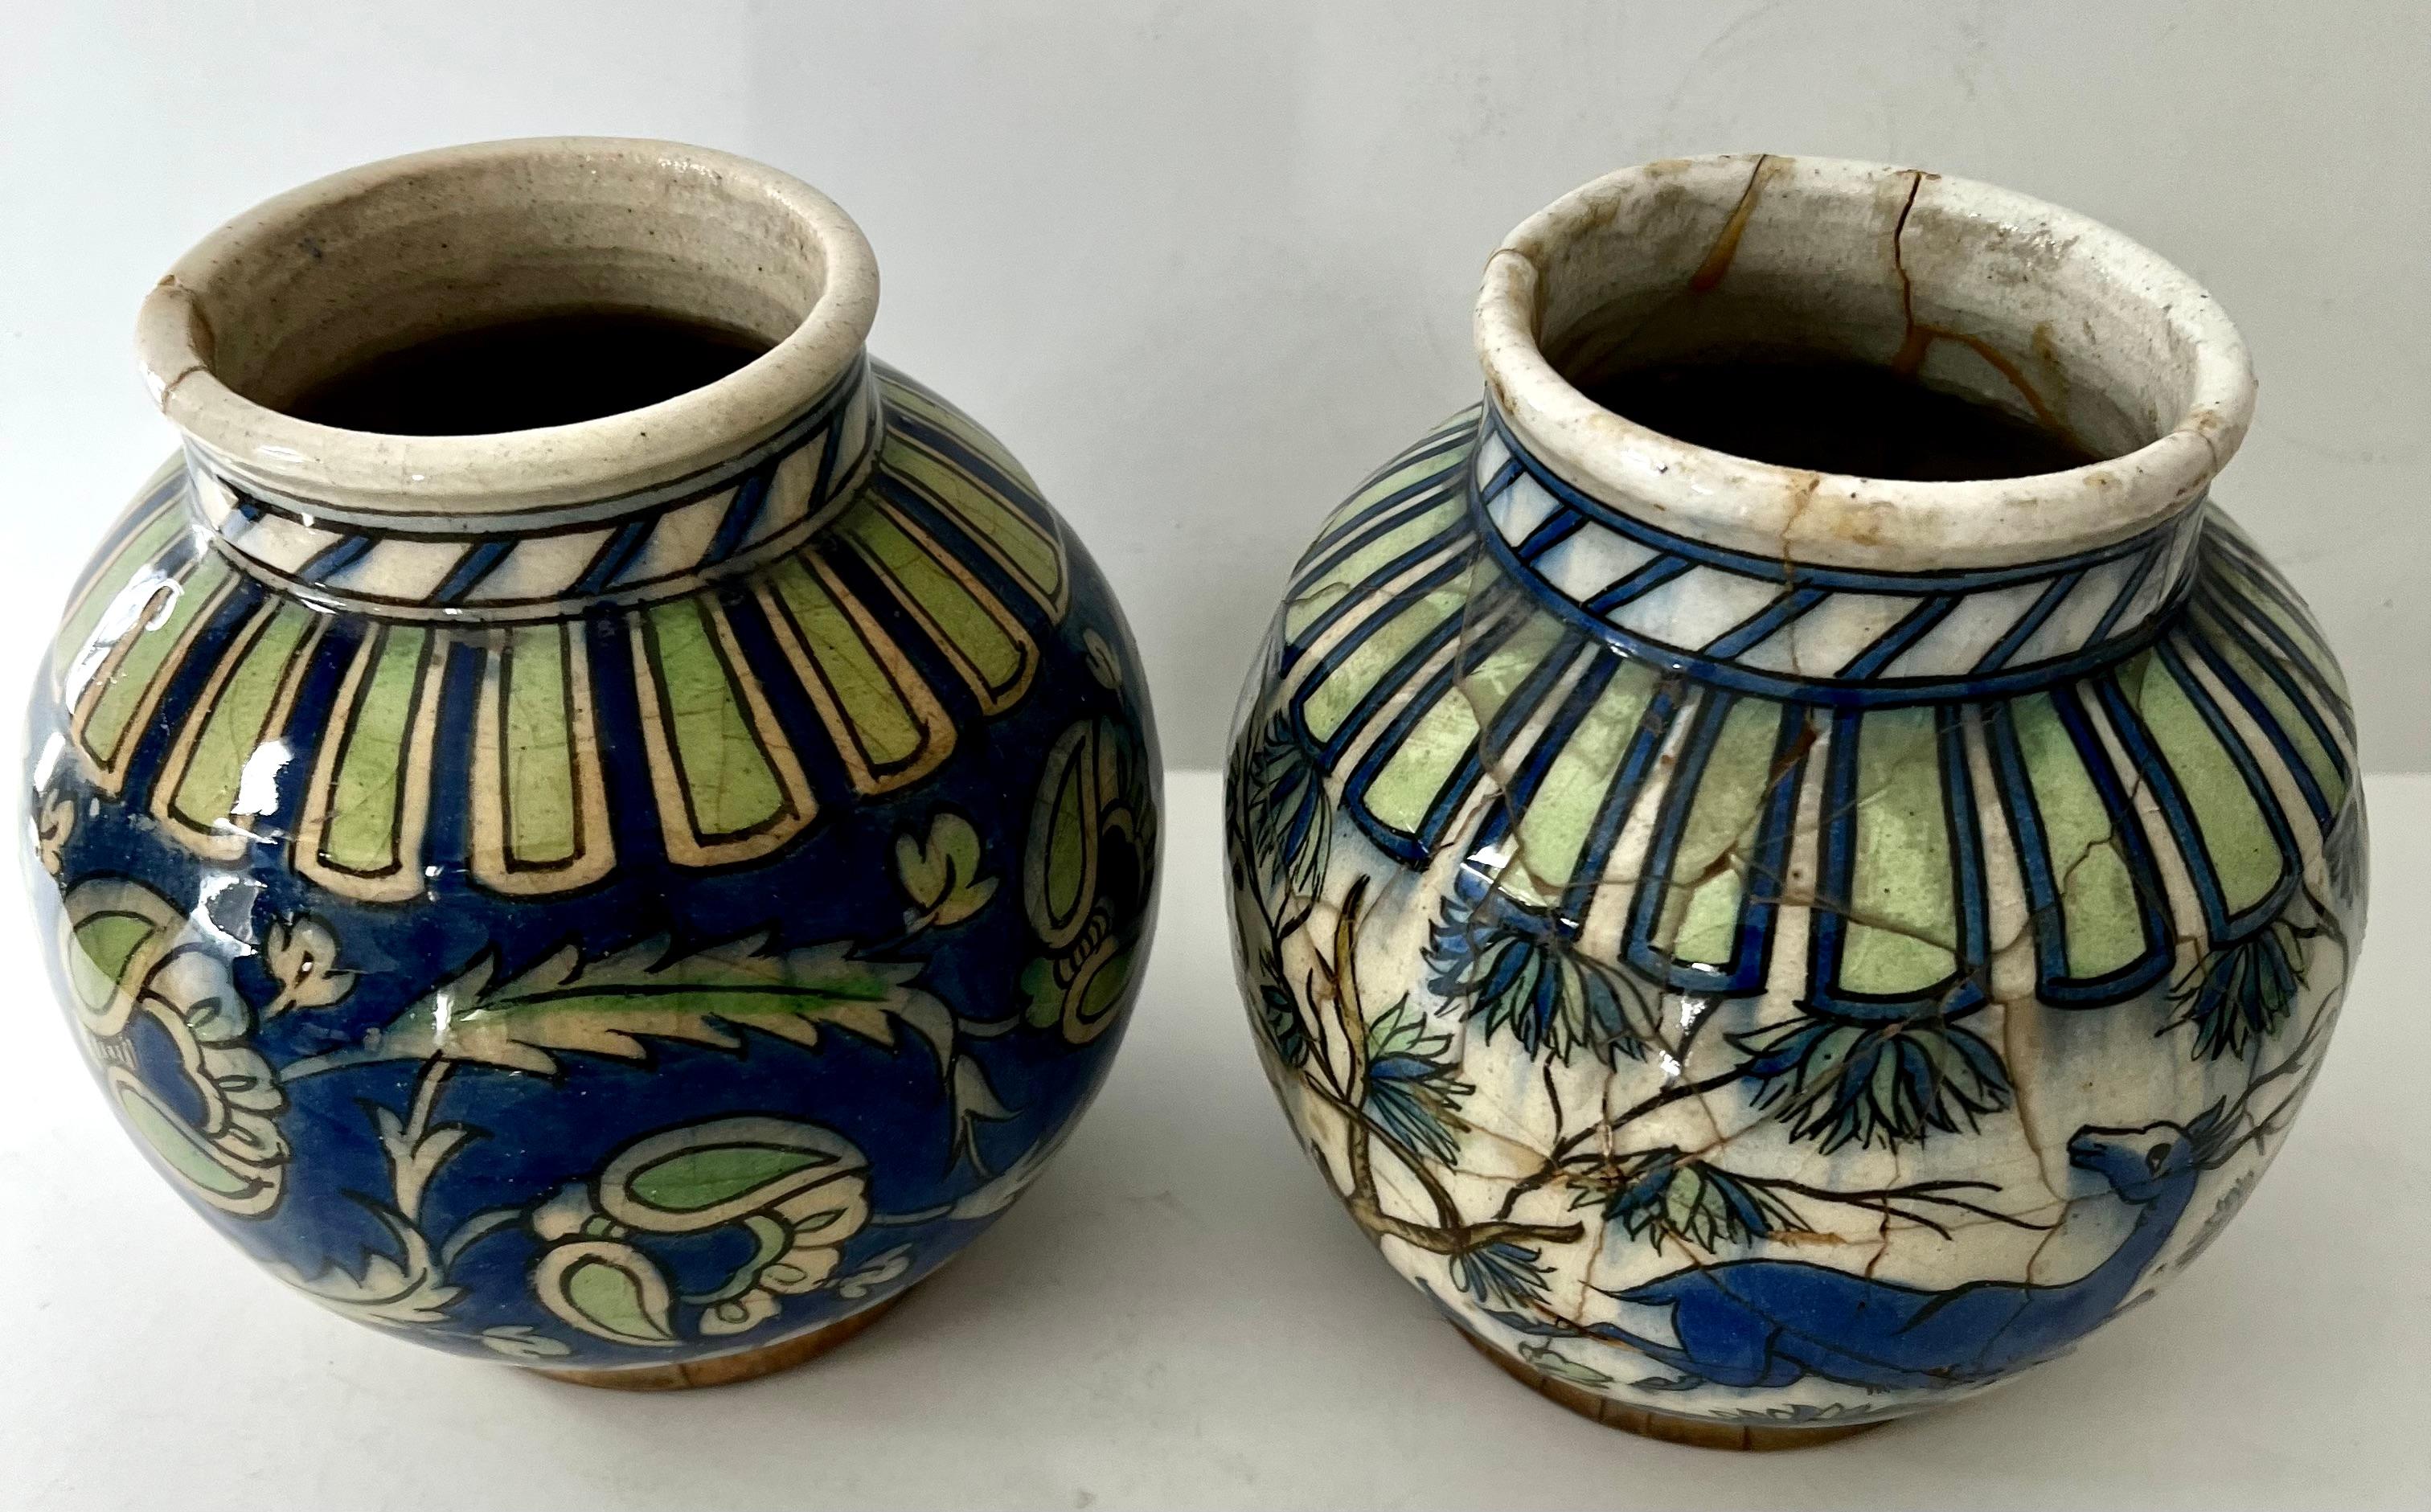 Pair of 18th Century Italian Glazed Terracotta Planters Vessels For Sale 2